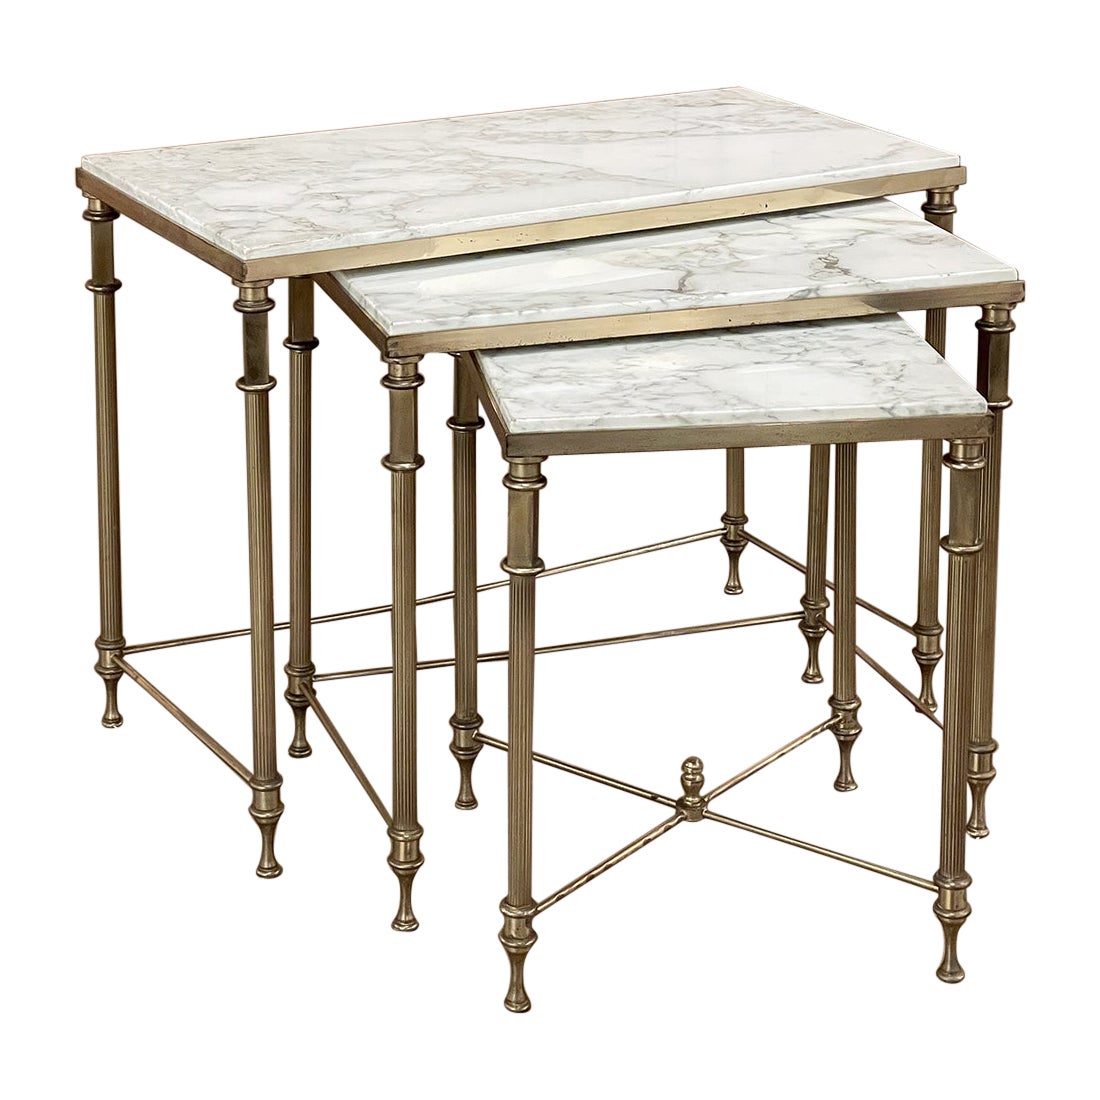 Midcentury French Neoclassical Brass Nesting Tables with Marble Tops For Sale